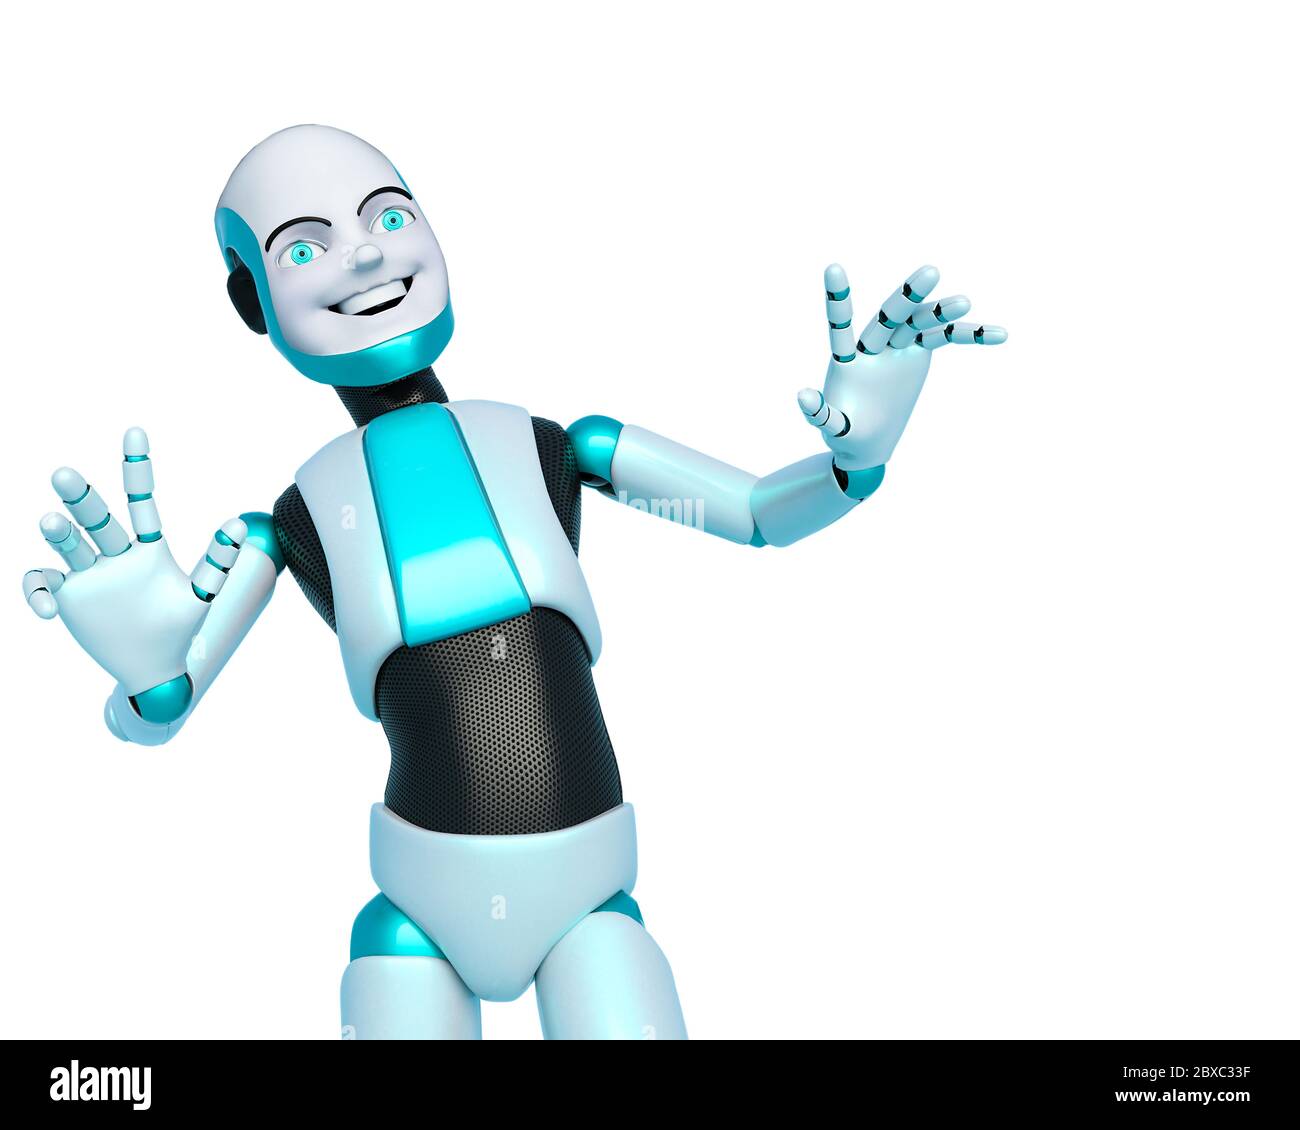 https://c8.alamy.com/comp/2BXC33F/robot-boy-cartoon-is-just-happy-this-guy-in-clipping-path-is-very-useful-for-graphic-design-creations-3d-illustration-2BXC33F.jpg